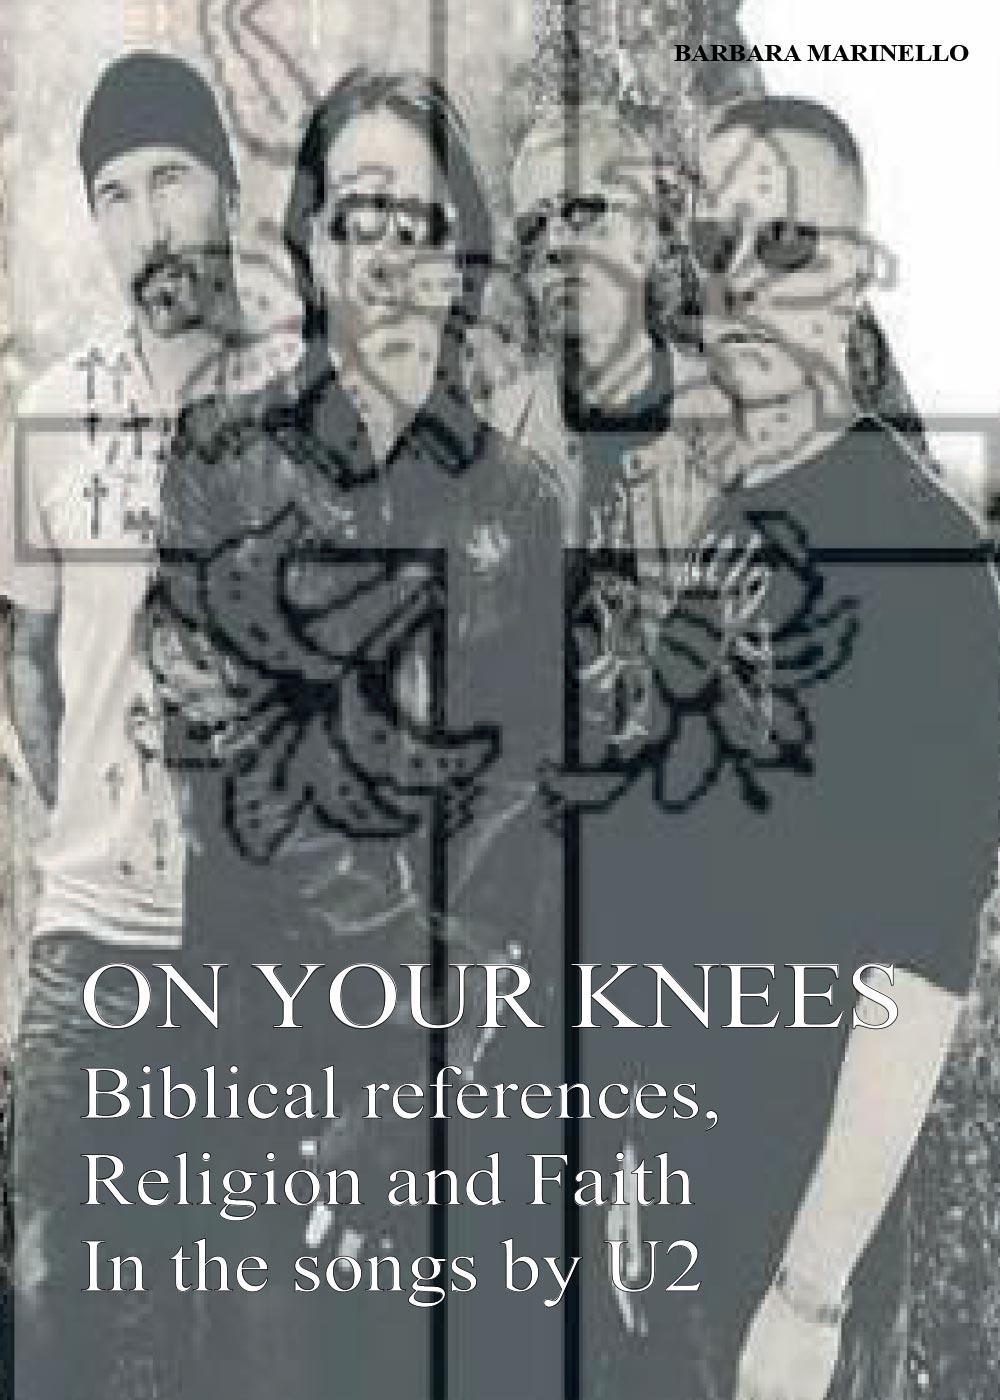 On Your Knees - Biblical references, Religion and Faith In the songs by U2 